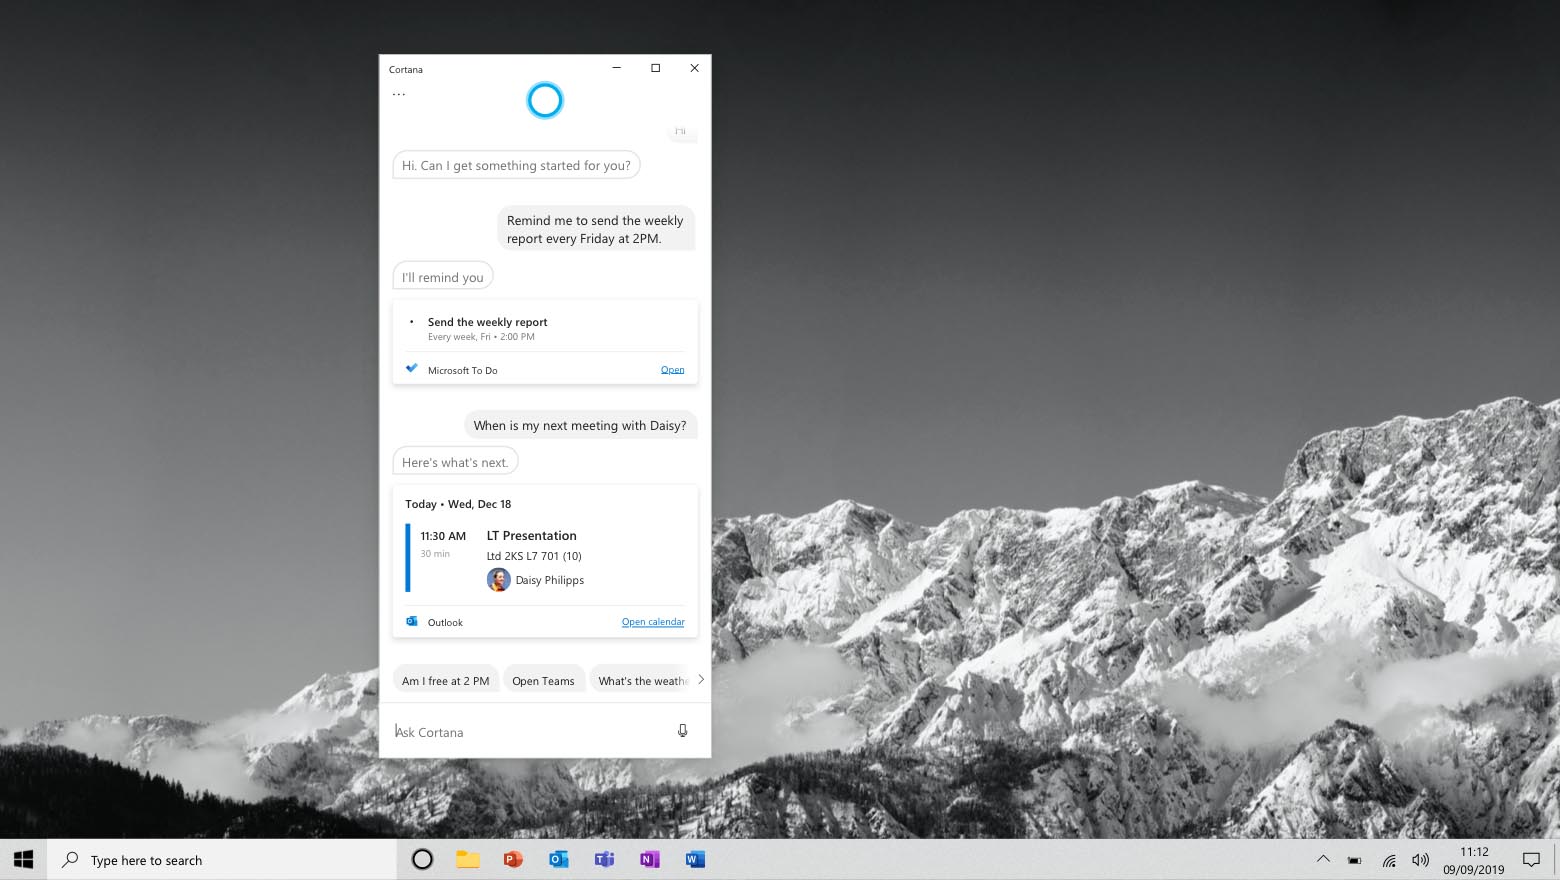 Cortana interaction with a user to set up a meeting reminder